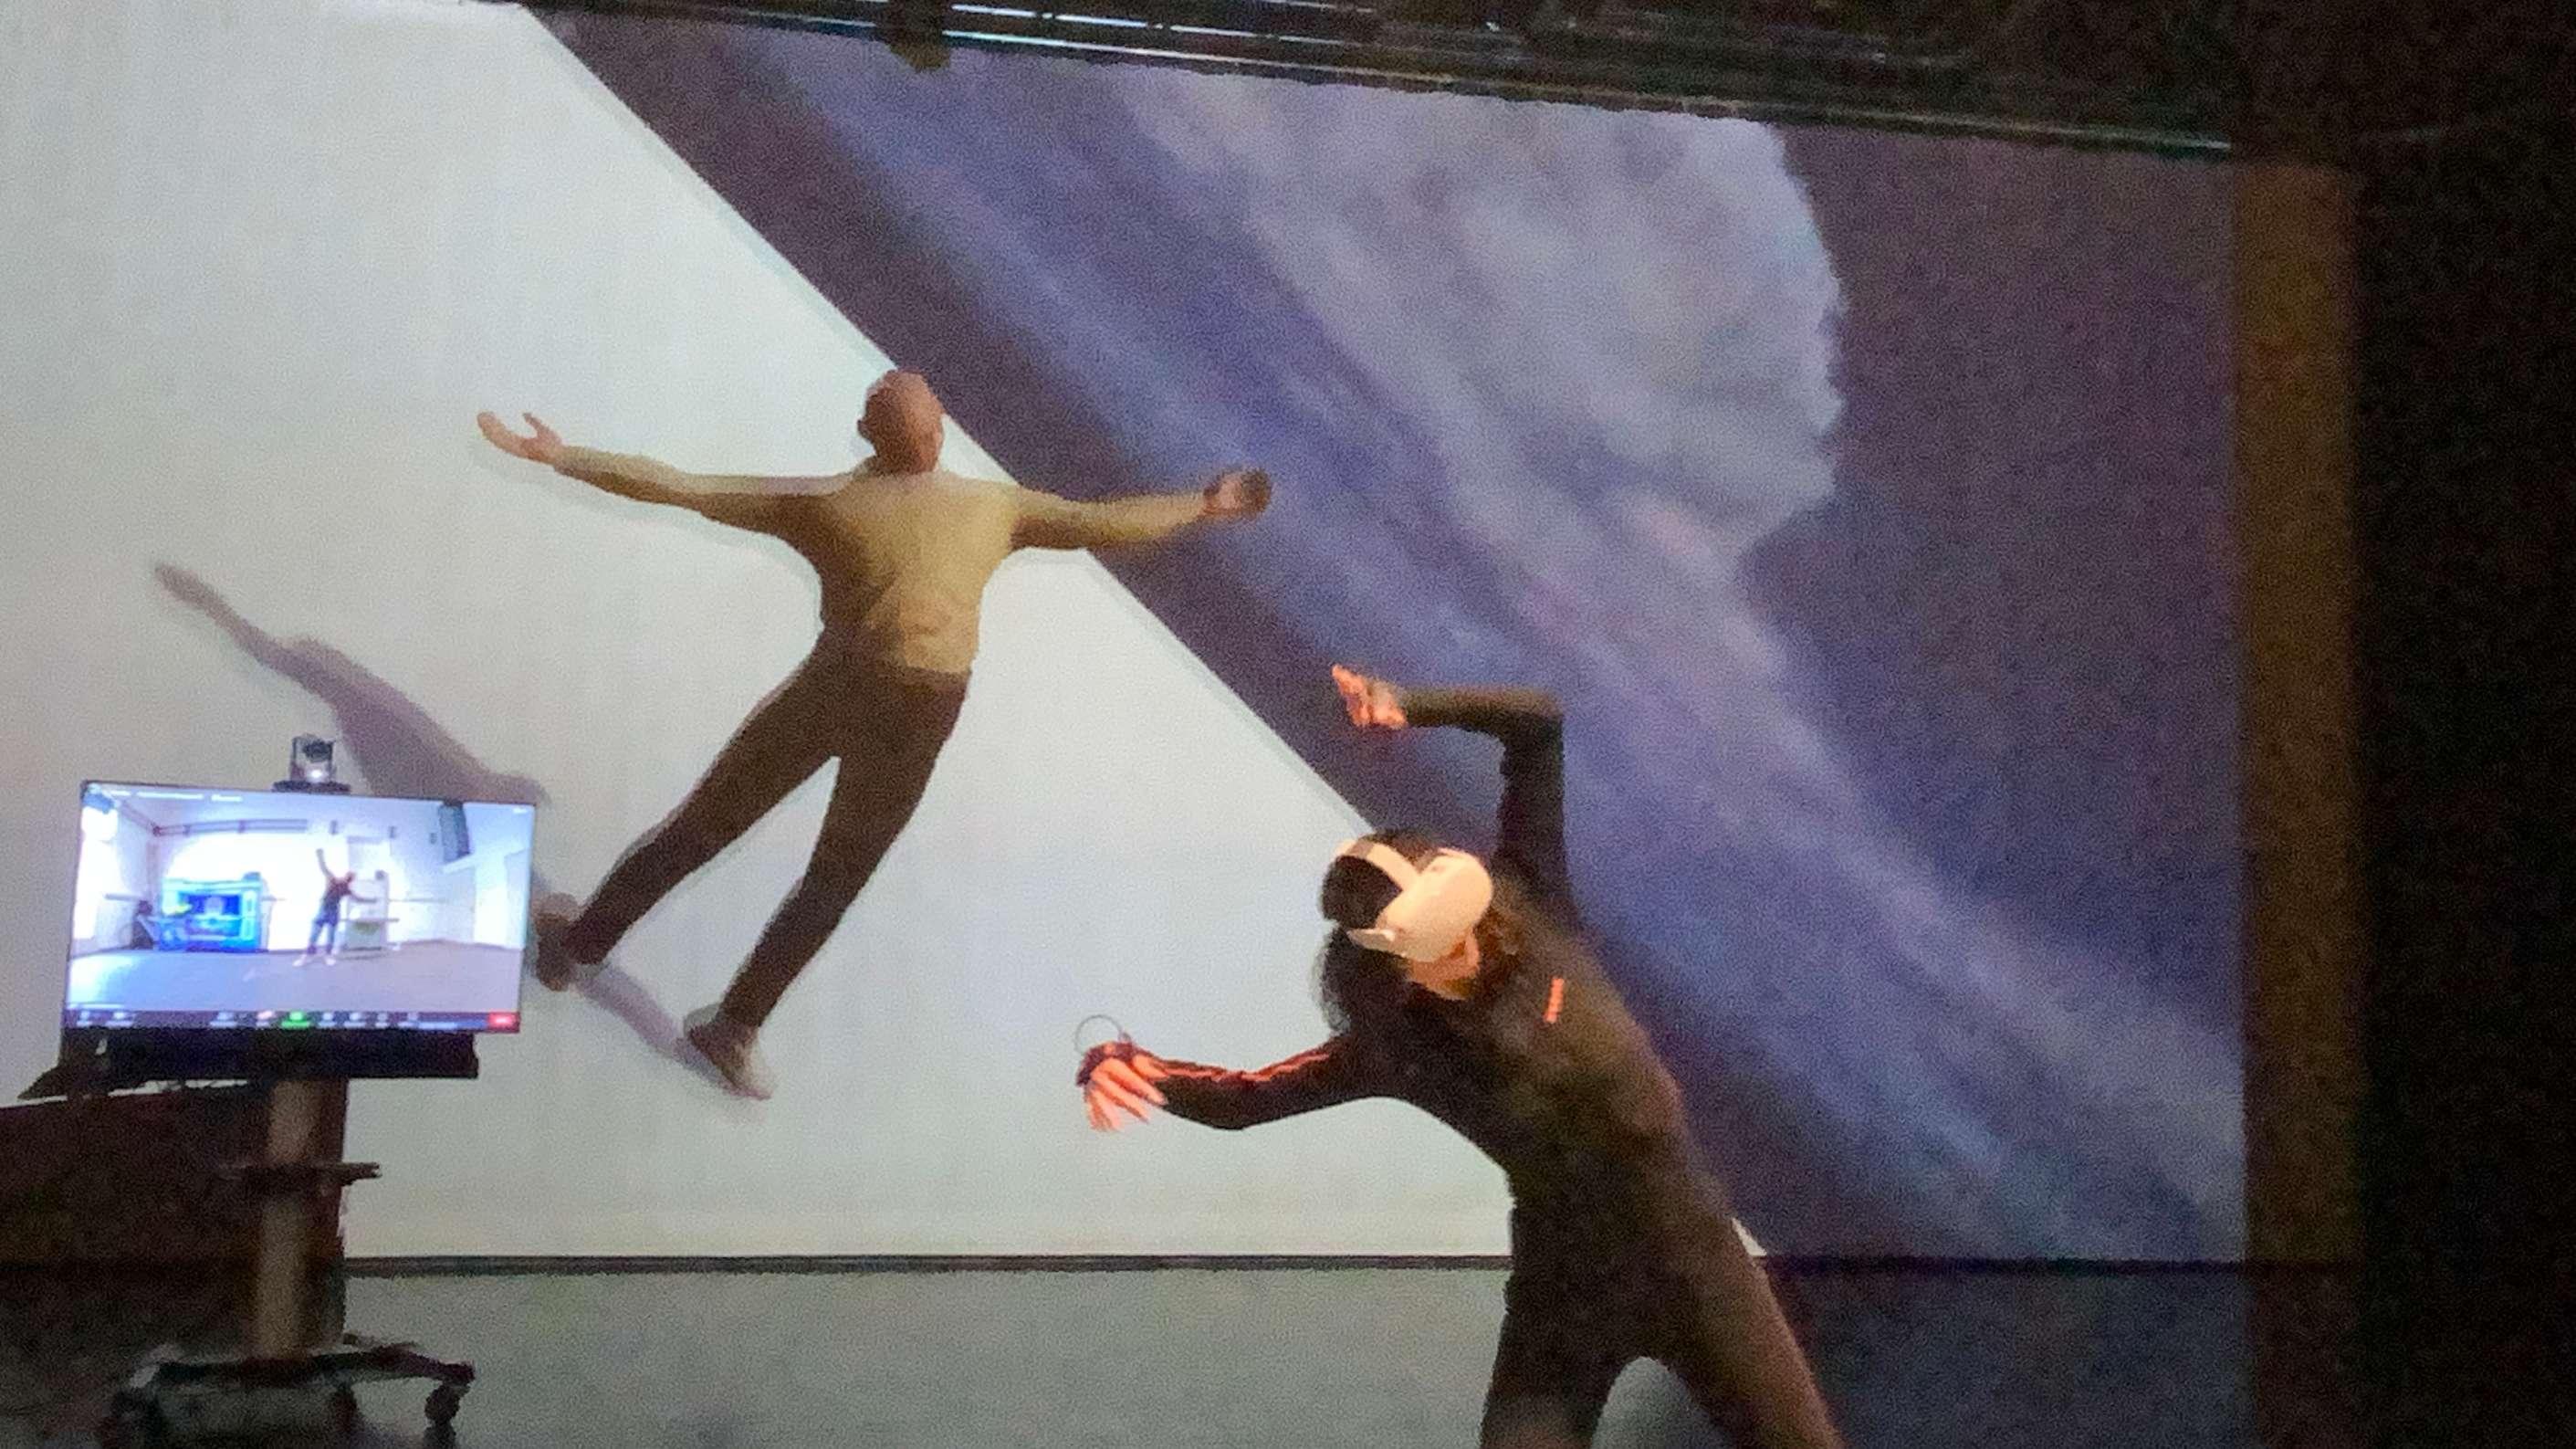 Dance knowledge transmission in virtual space: problems and potentials